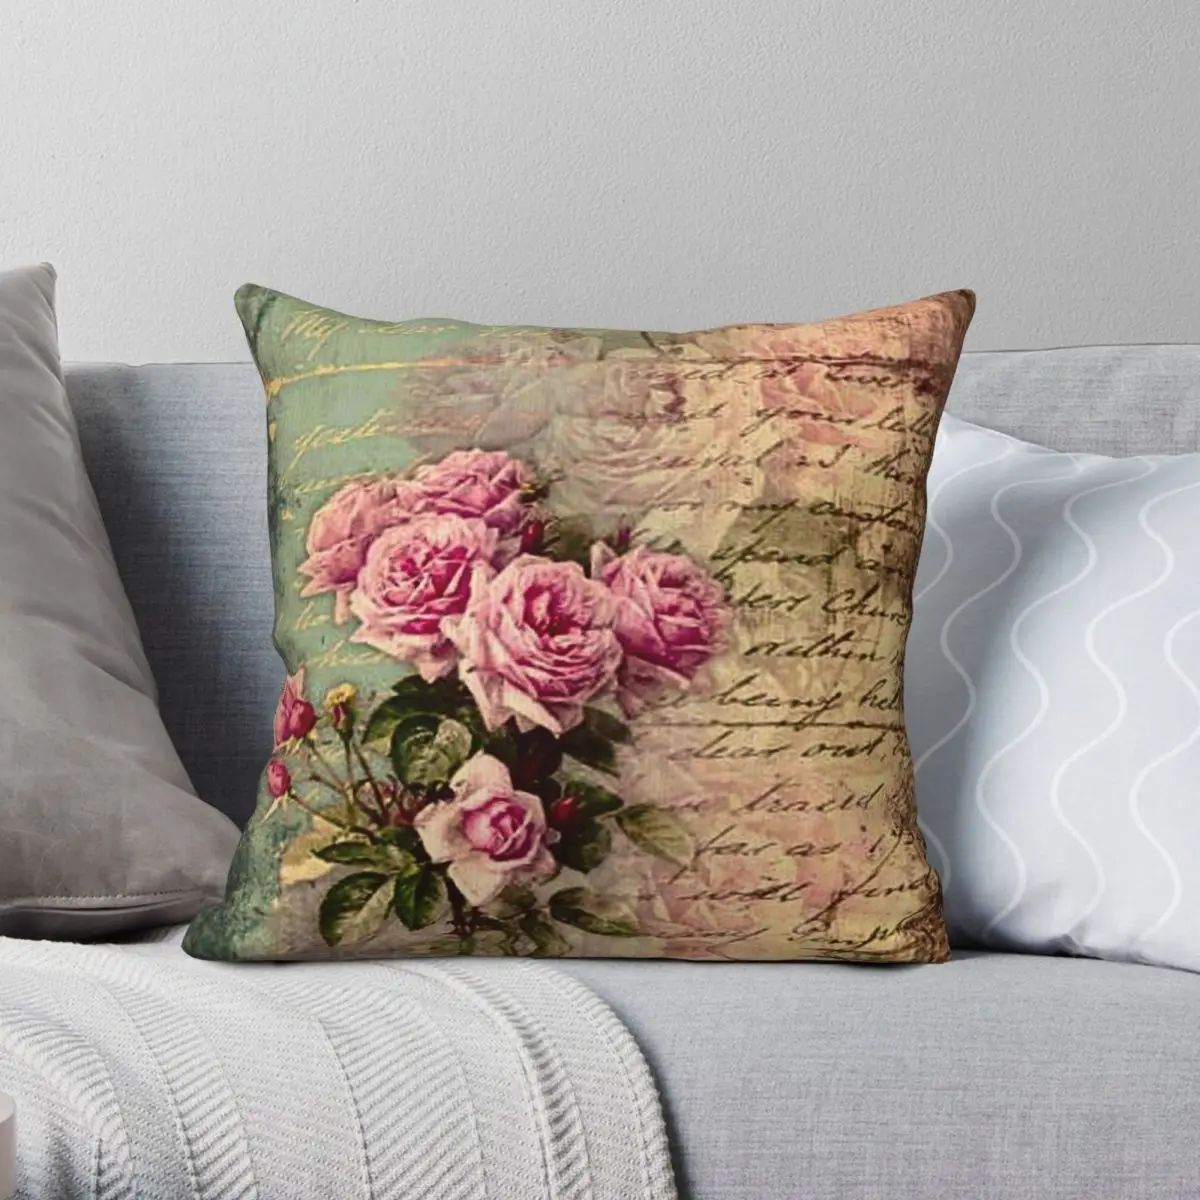 

French Country Chic Peonies Pillowcase Polyester Linen Velvet Printed Zip Decor Sofa Cushion Cover Wholesale